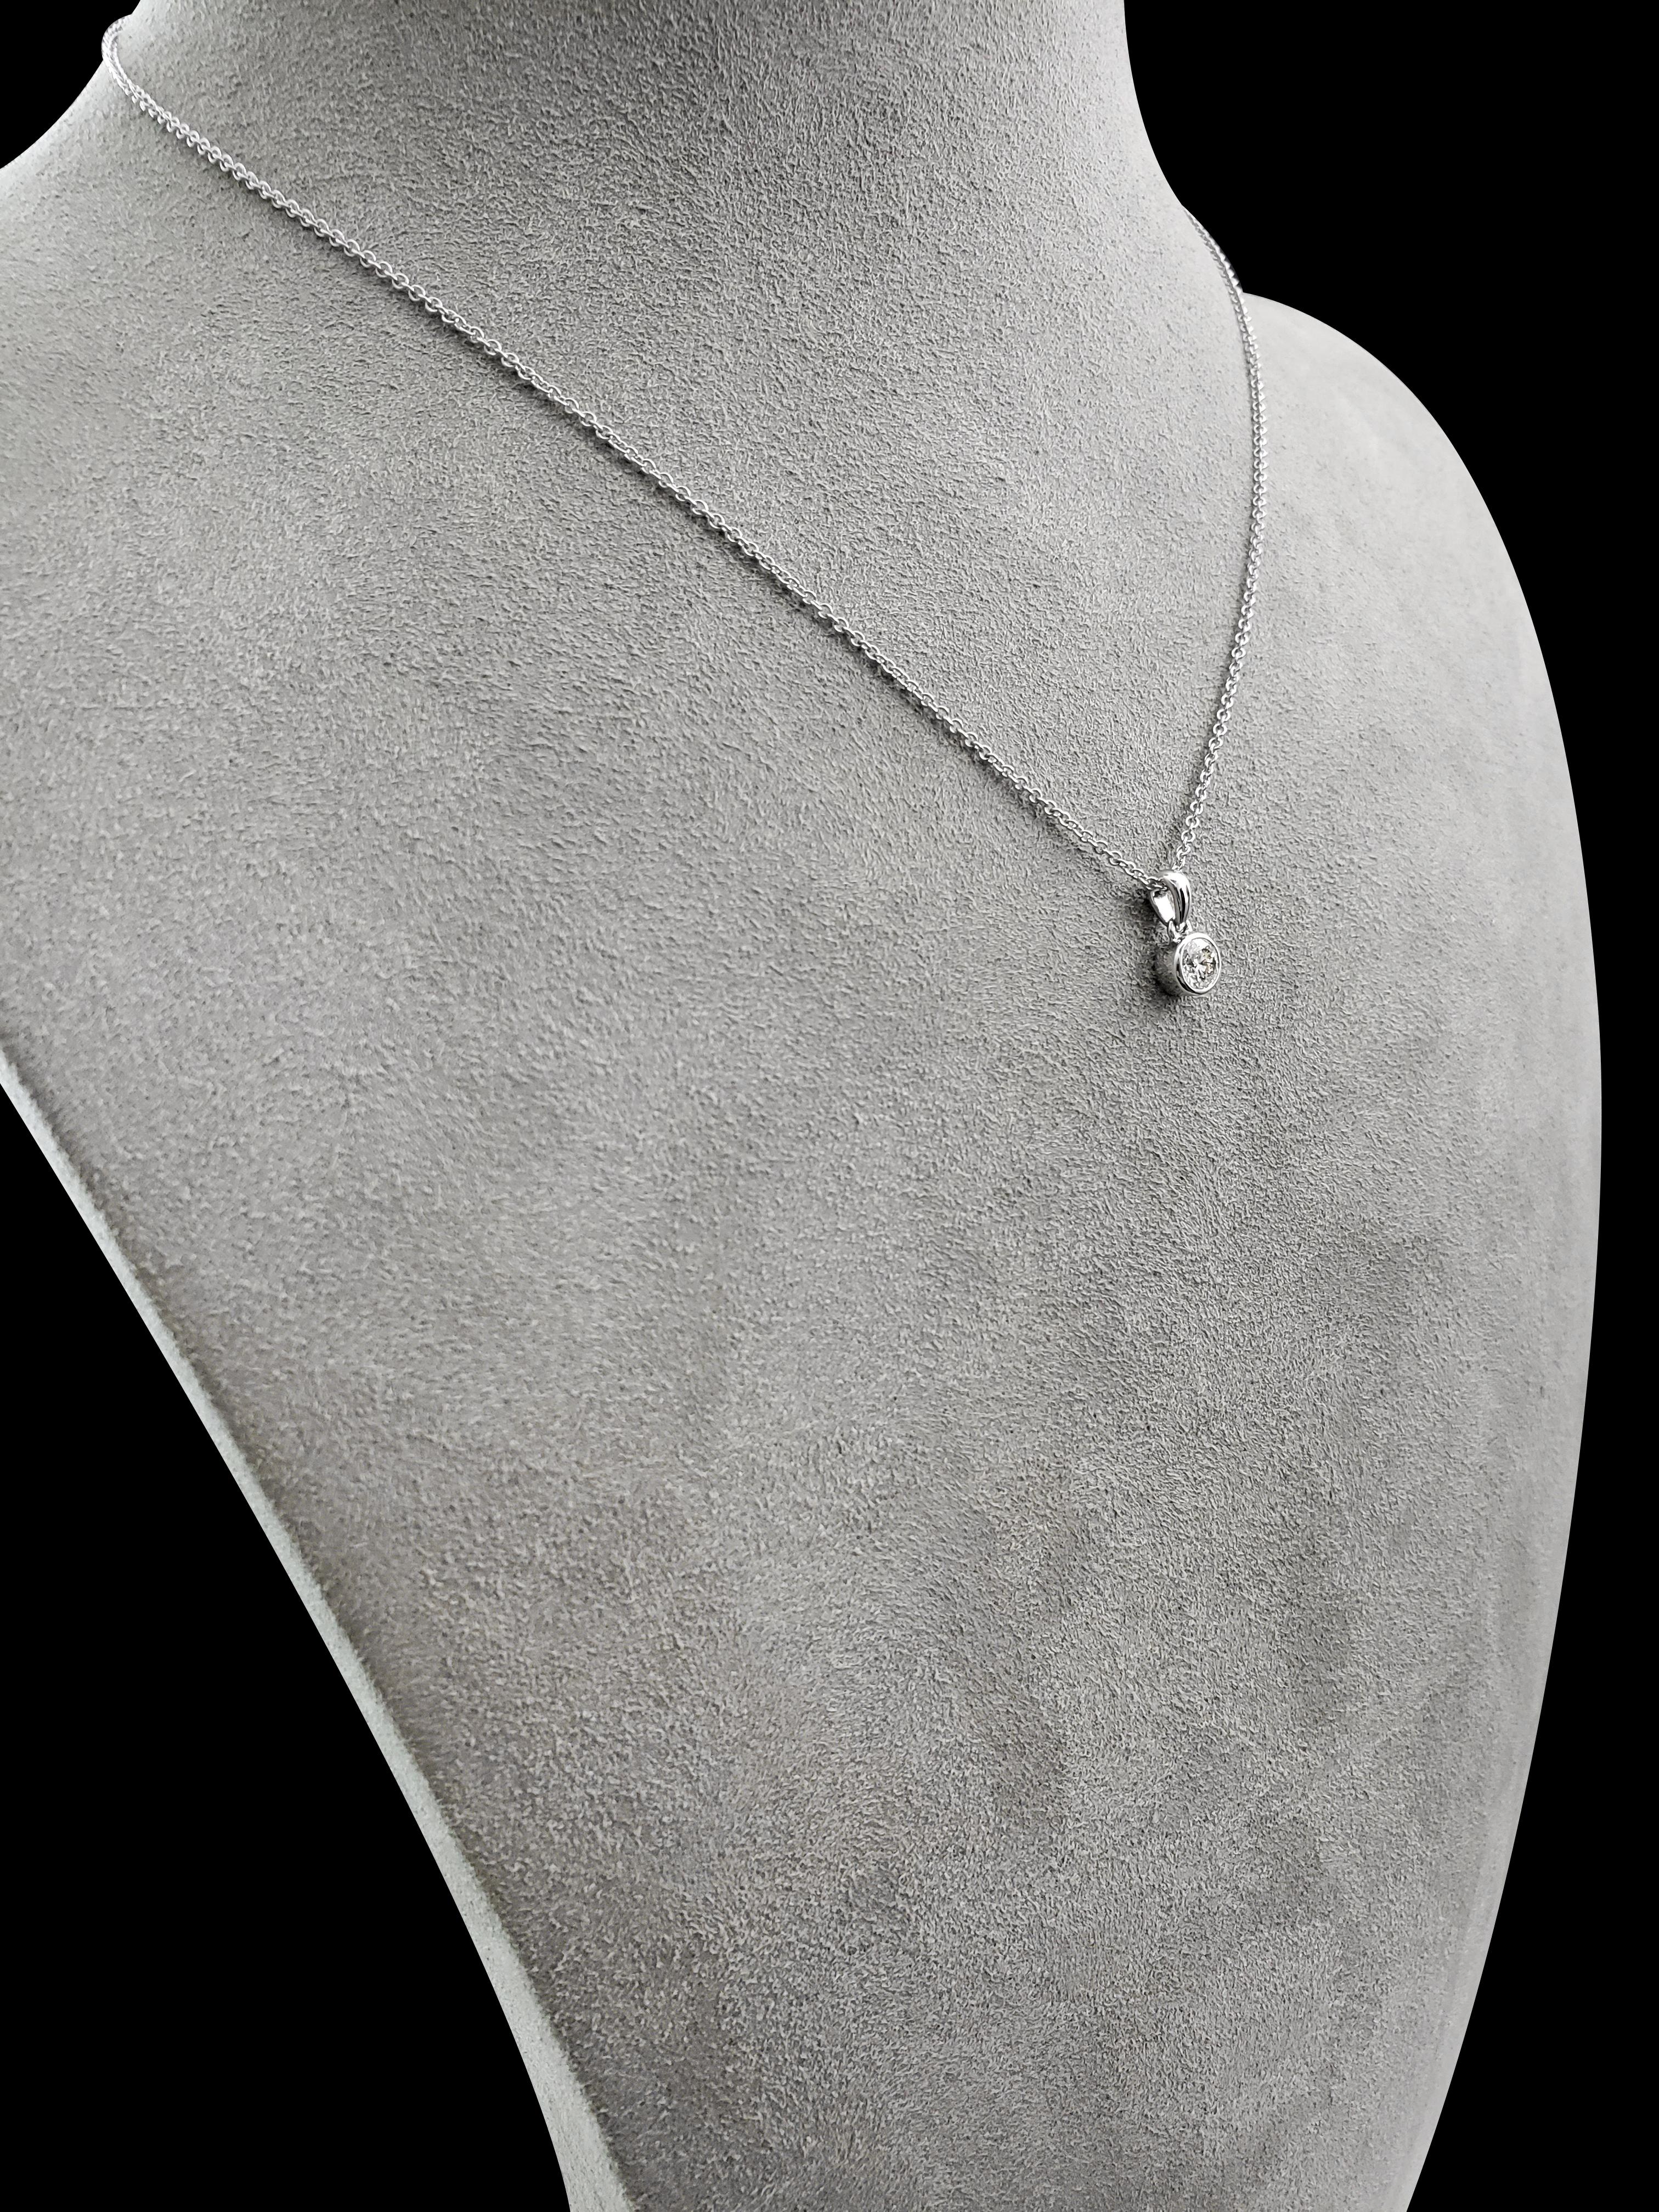 A unique pendant necklace showcasing a 0.34 carat round diamond set on an 18 karat white gold bezel. Suspended on a rounded bale; attached to an 18 inch white gold chain. 

Style available in different price ranges. Prices are based on your